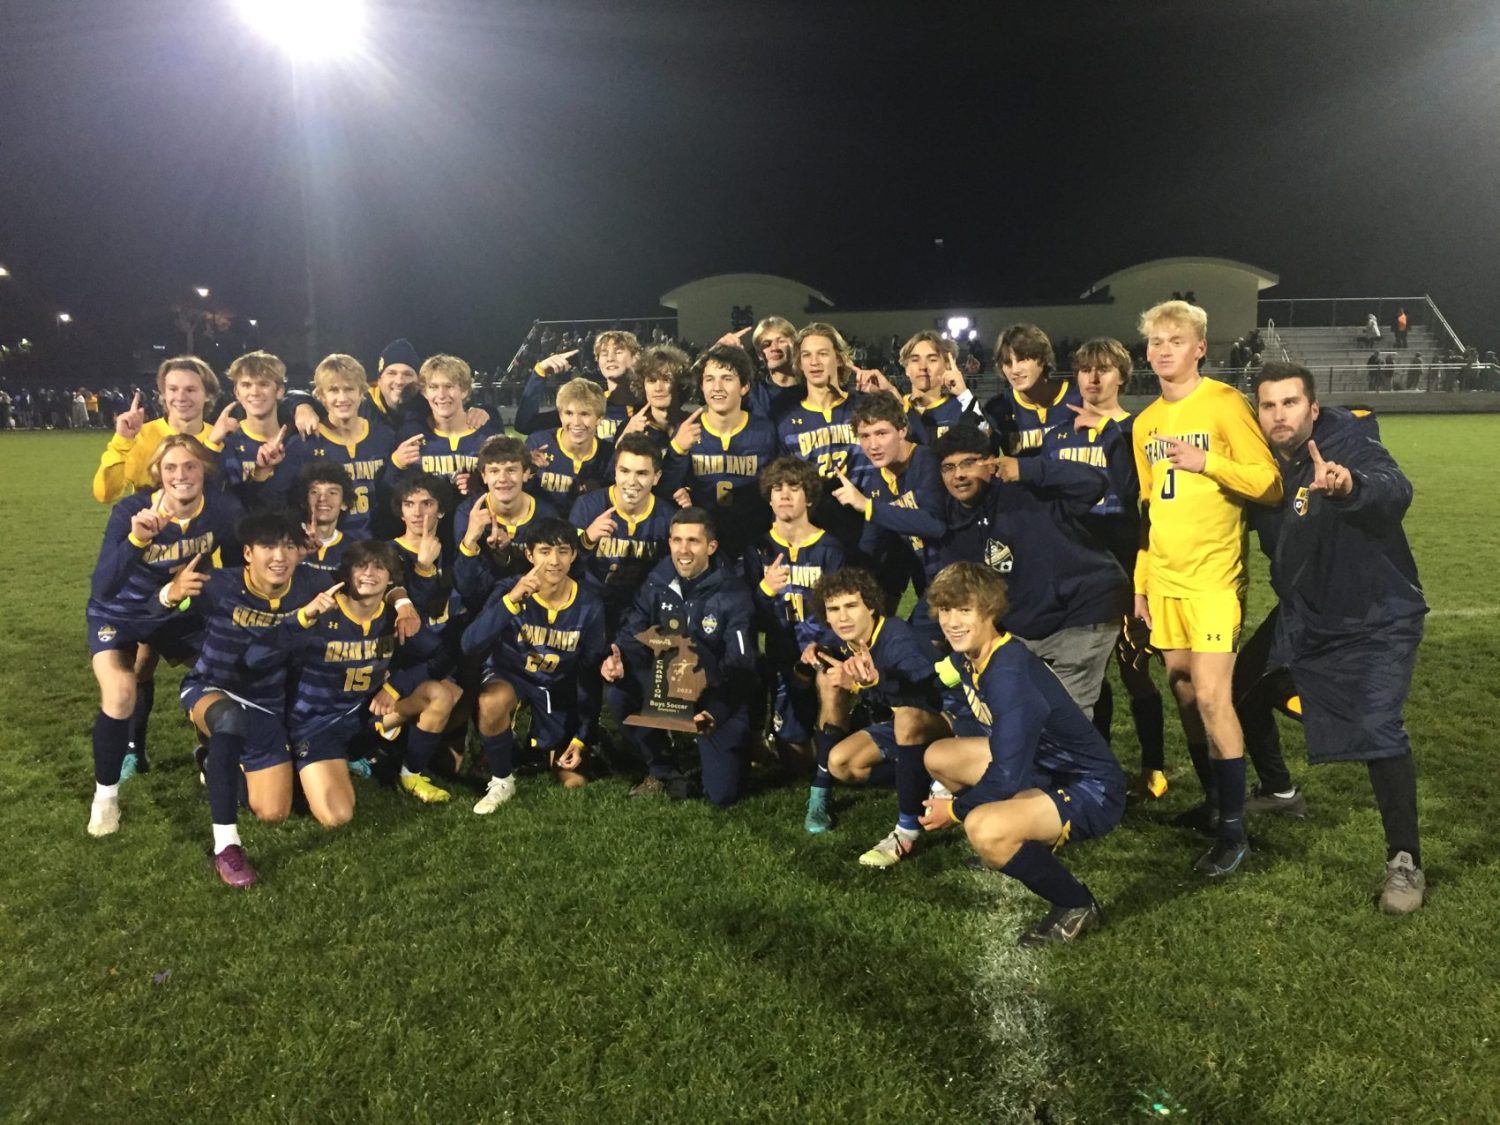 Grand Haven escapes with Division 1 district soccer title over shorthanded Mona Shores